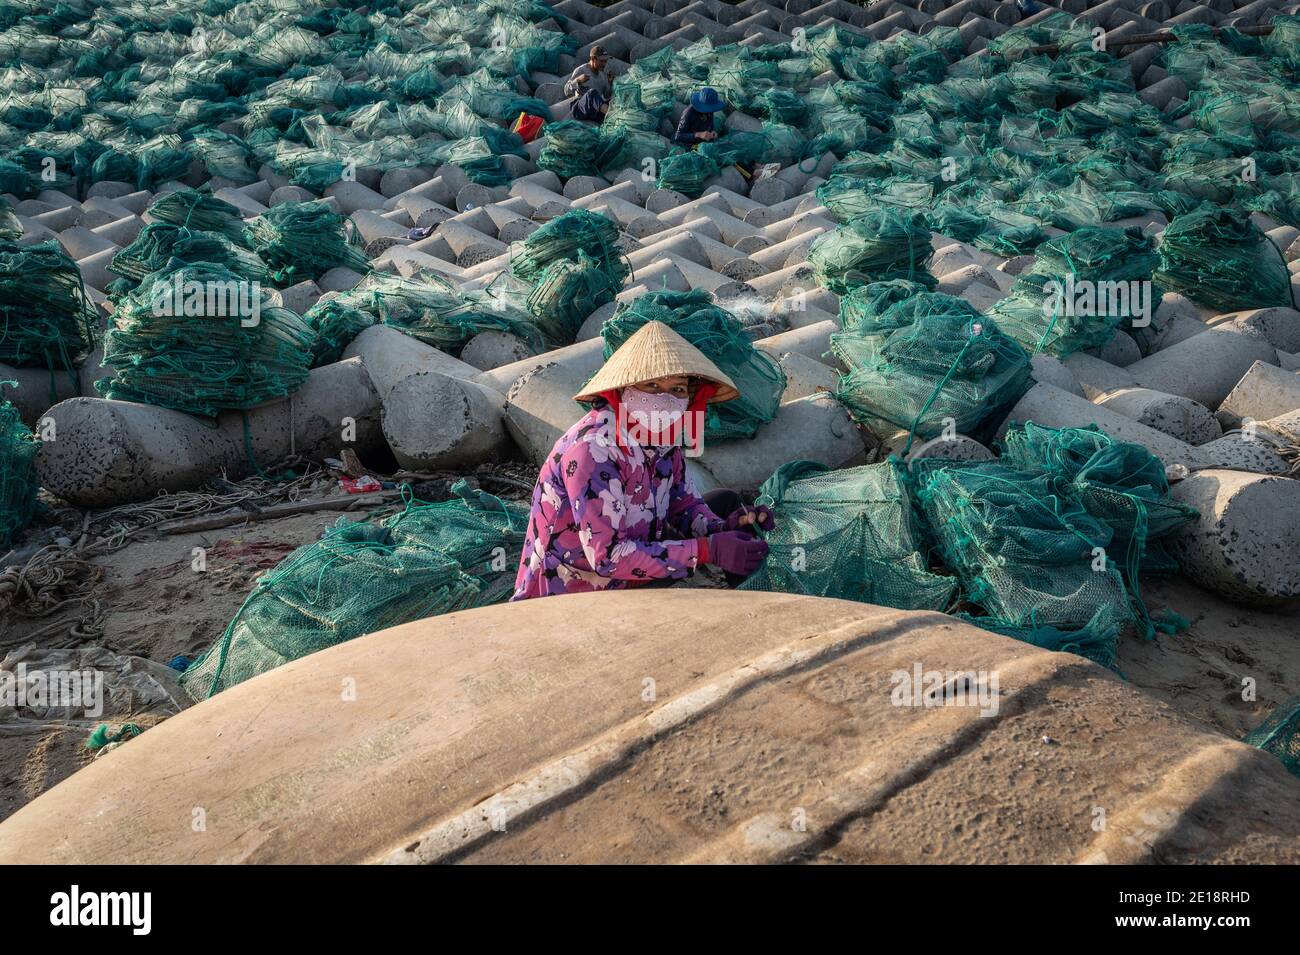 Woman working the nets, Can ca Loc An, Vietnam Stock Photo